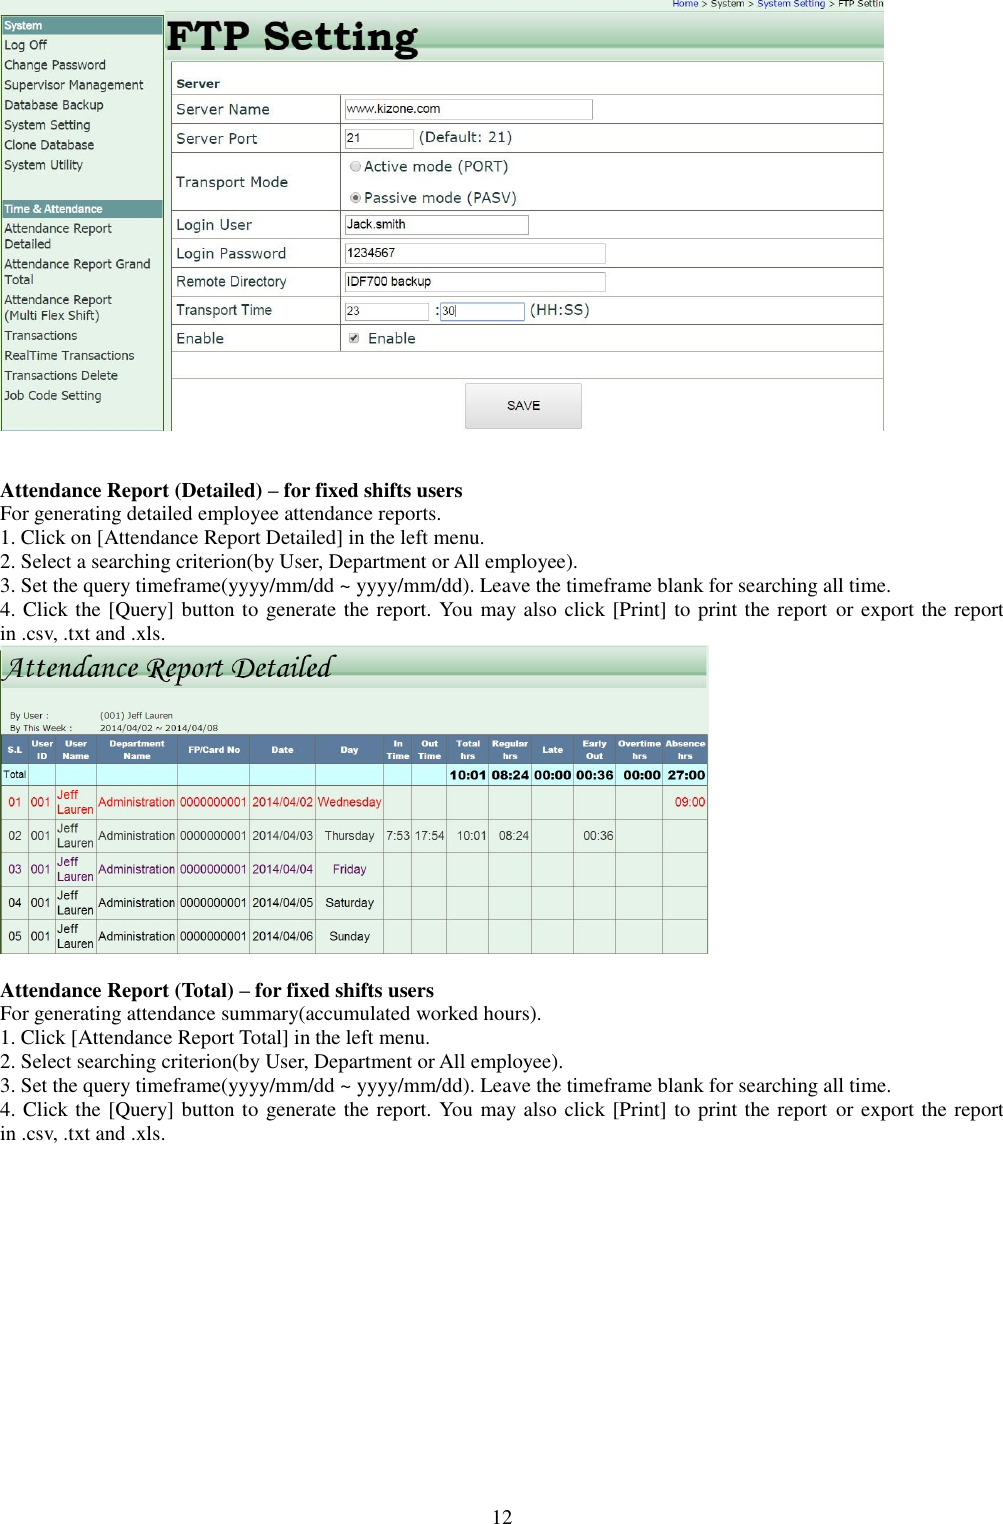  12    Attendance Report (Detailed) – for fixed shifts users For generating detailed employee attendance reports. 1. Click on [Attendance Report Detailed] in the left menu. 2. Select a searching criterion(by User, Department or All employee). 3. Set the query timeframe(yyyy/mm/dd ~ yyyy/mm/dd). Leave the timeframe blank for searching all time. 4. Click the [Query] button to generate the report. You may also click [Print] to print the report or export the report in .csv, .txt and .xls.   Attendance Report (Total) – for fixed shifts users For generating attendance summary(accumulated worked hours). 1. Click [Attendance Report Total] in the left menu. 2. Select searching criterion(by User, Department or All employee). 3. Set the query timeframe(yyyy/mm/dd ~ yyyy/mm/dd). Leave the timeframe blank for searching all time. 4. Click the [Query] button to generate the report. You may also click [Print] to print the report or export the report in .csv, .txt and .xls. 